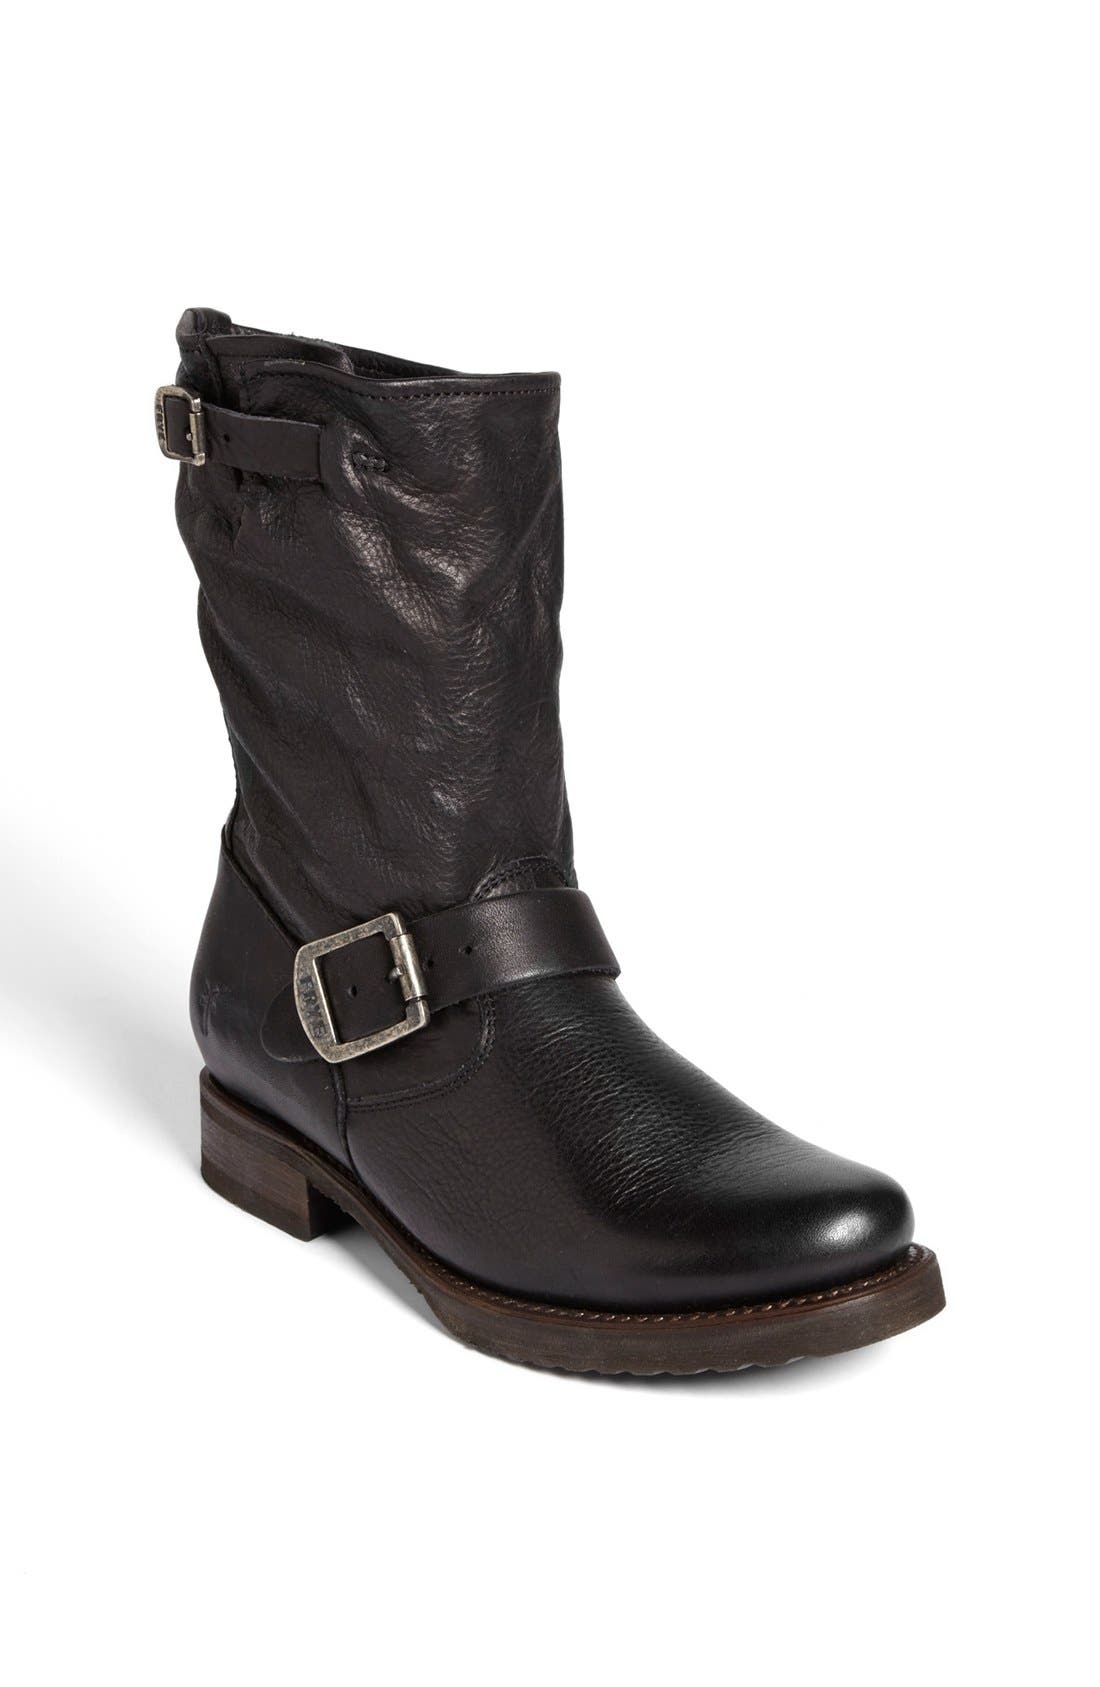 nordstrom slouchy boots